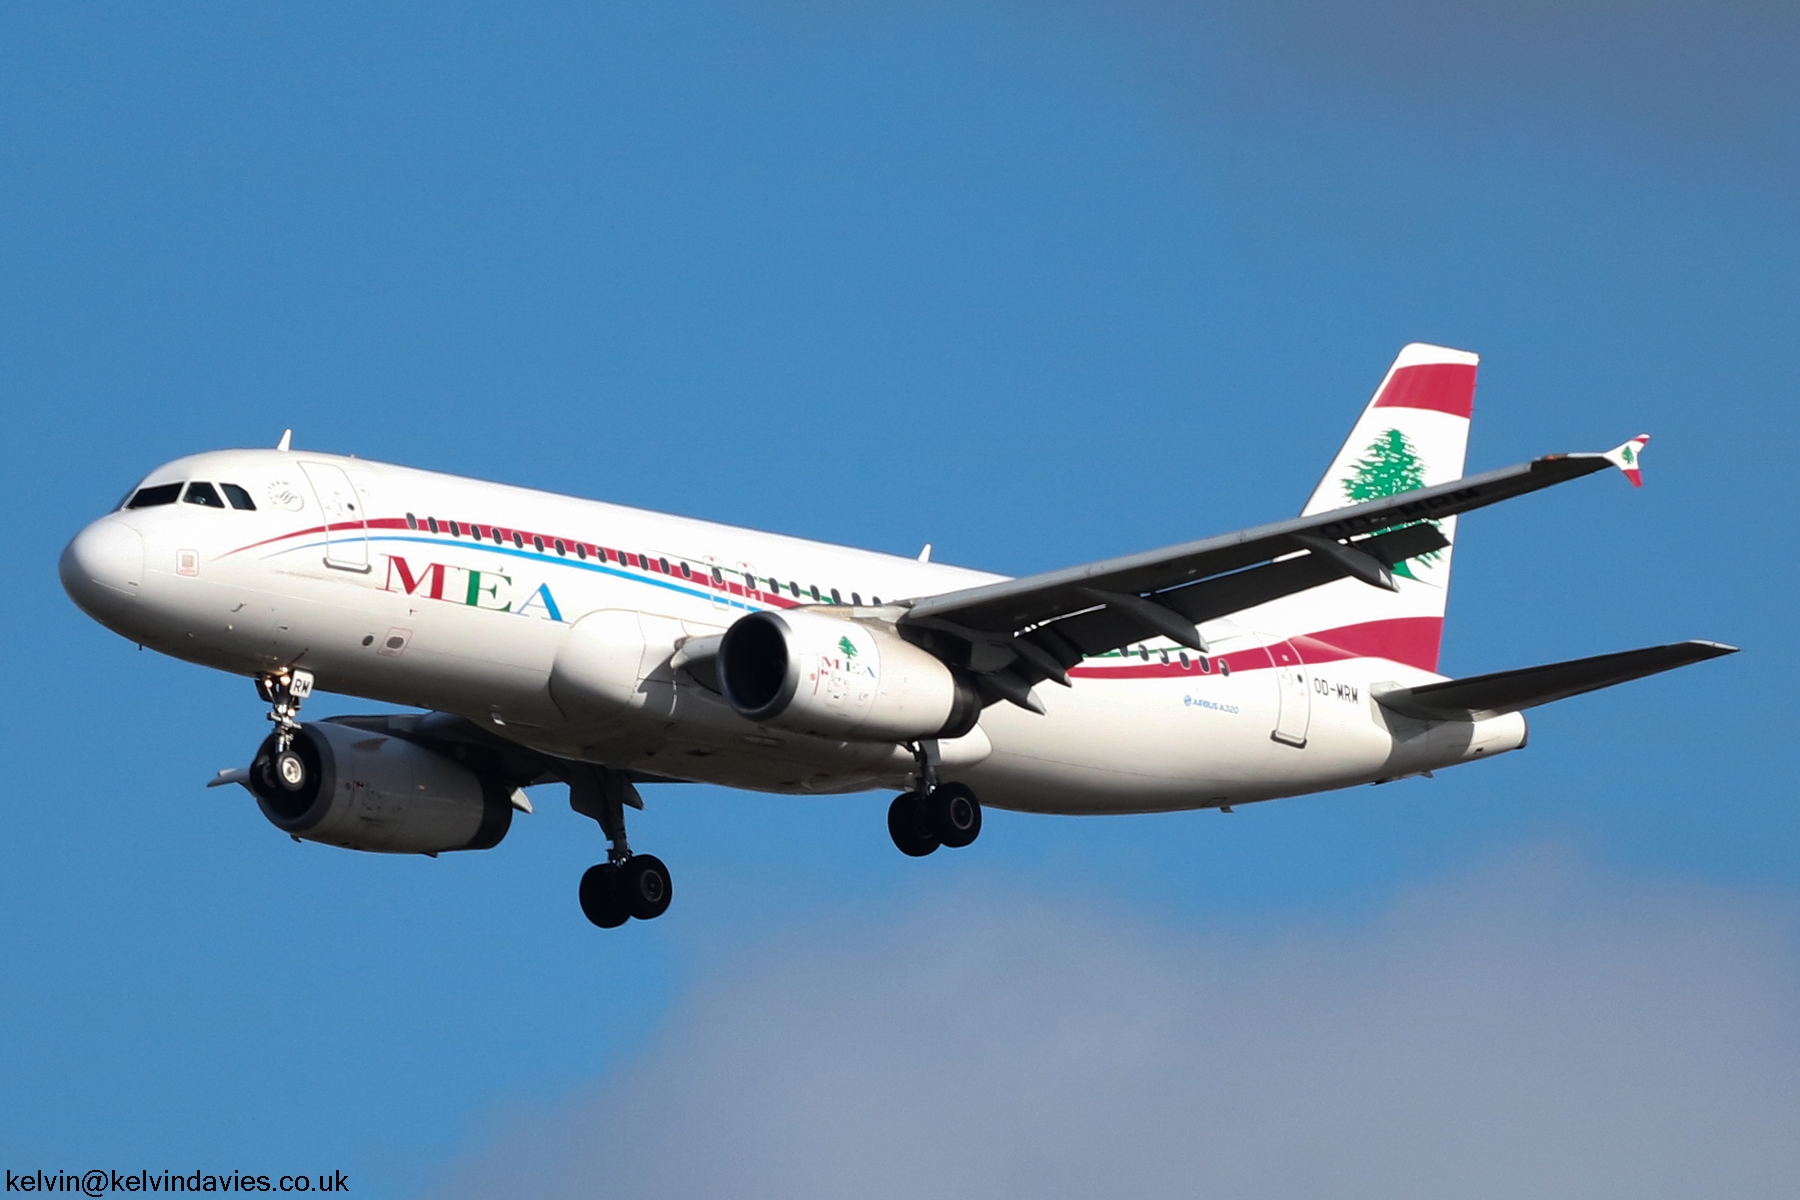 Middle East Airlines A320 OD-MRM